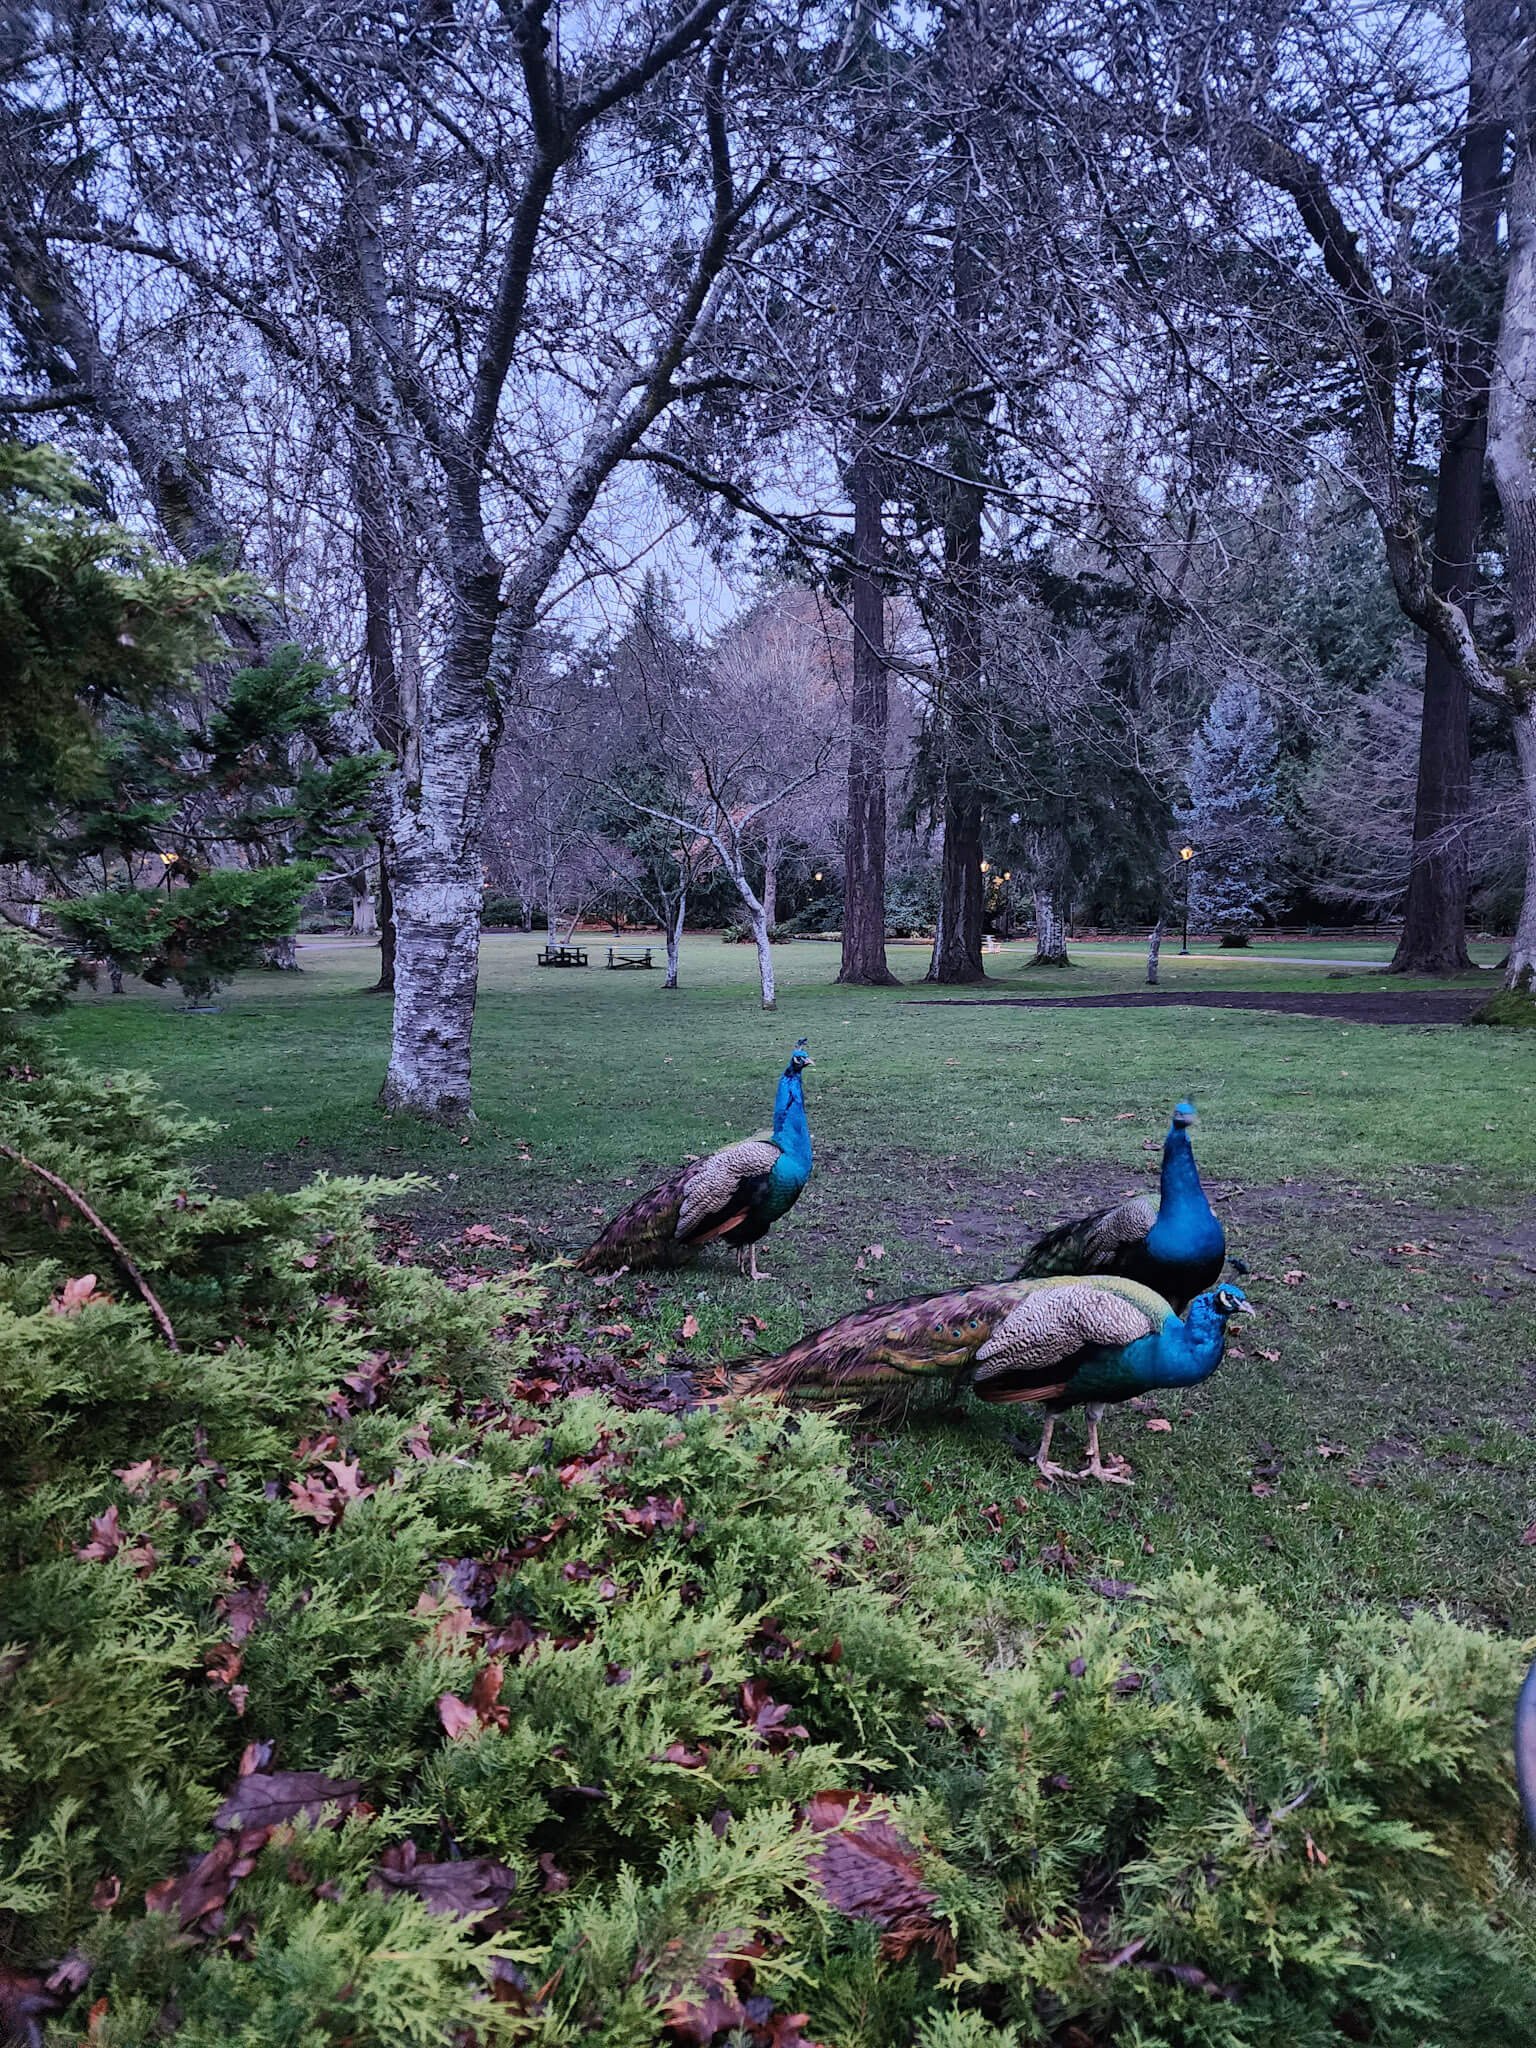 Peacocks at Beacon Hill Park in Victoria, BC